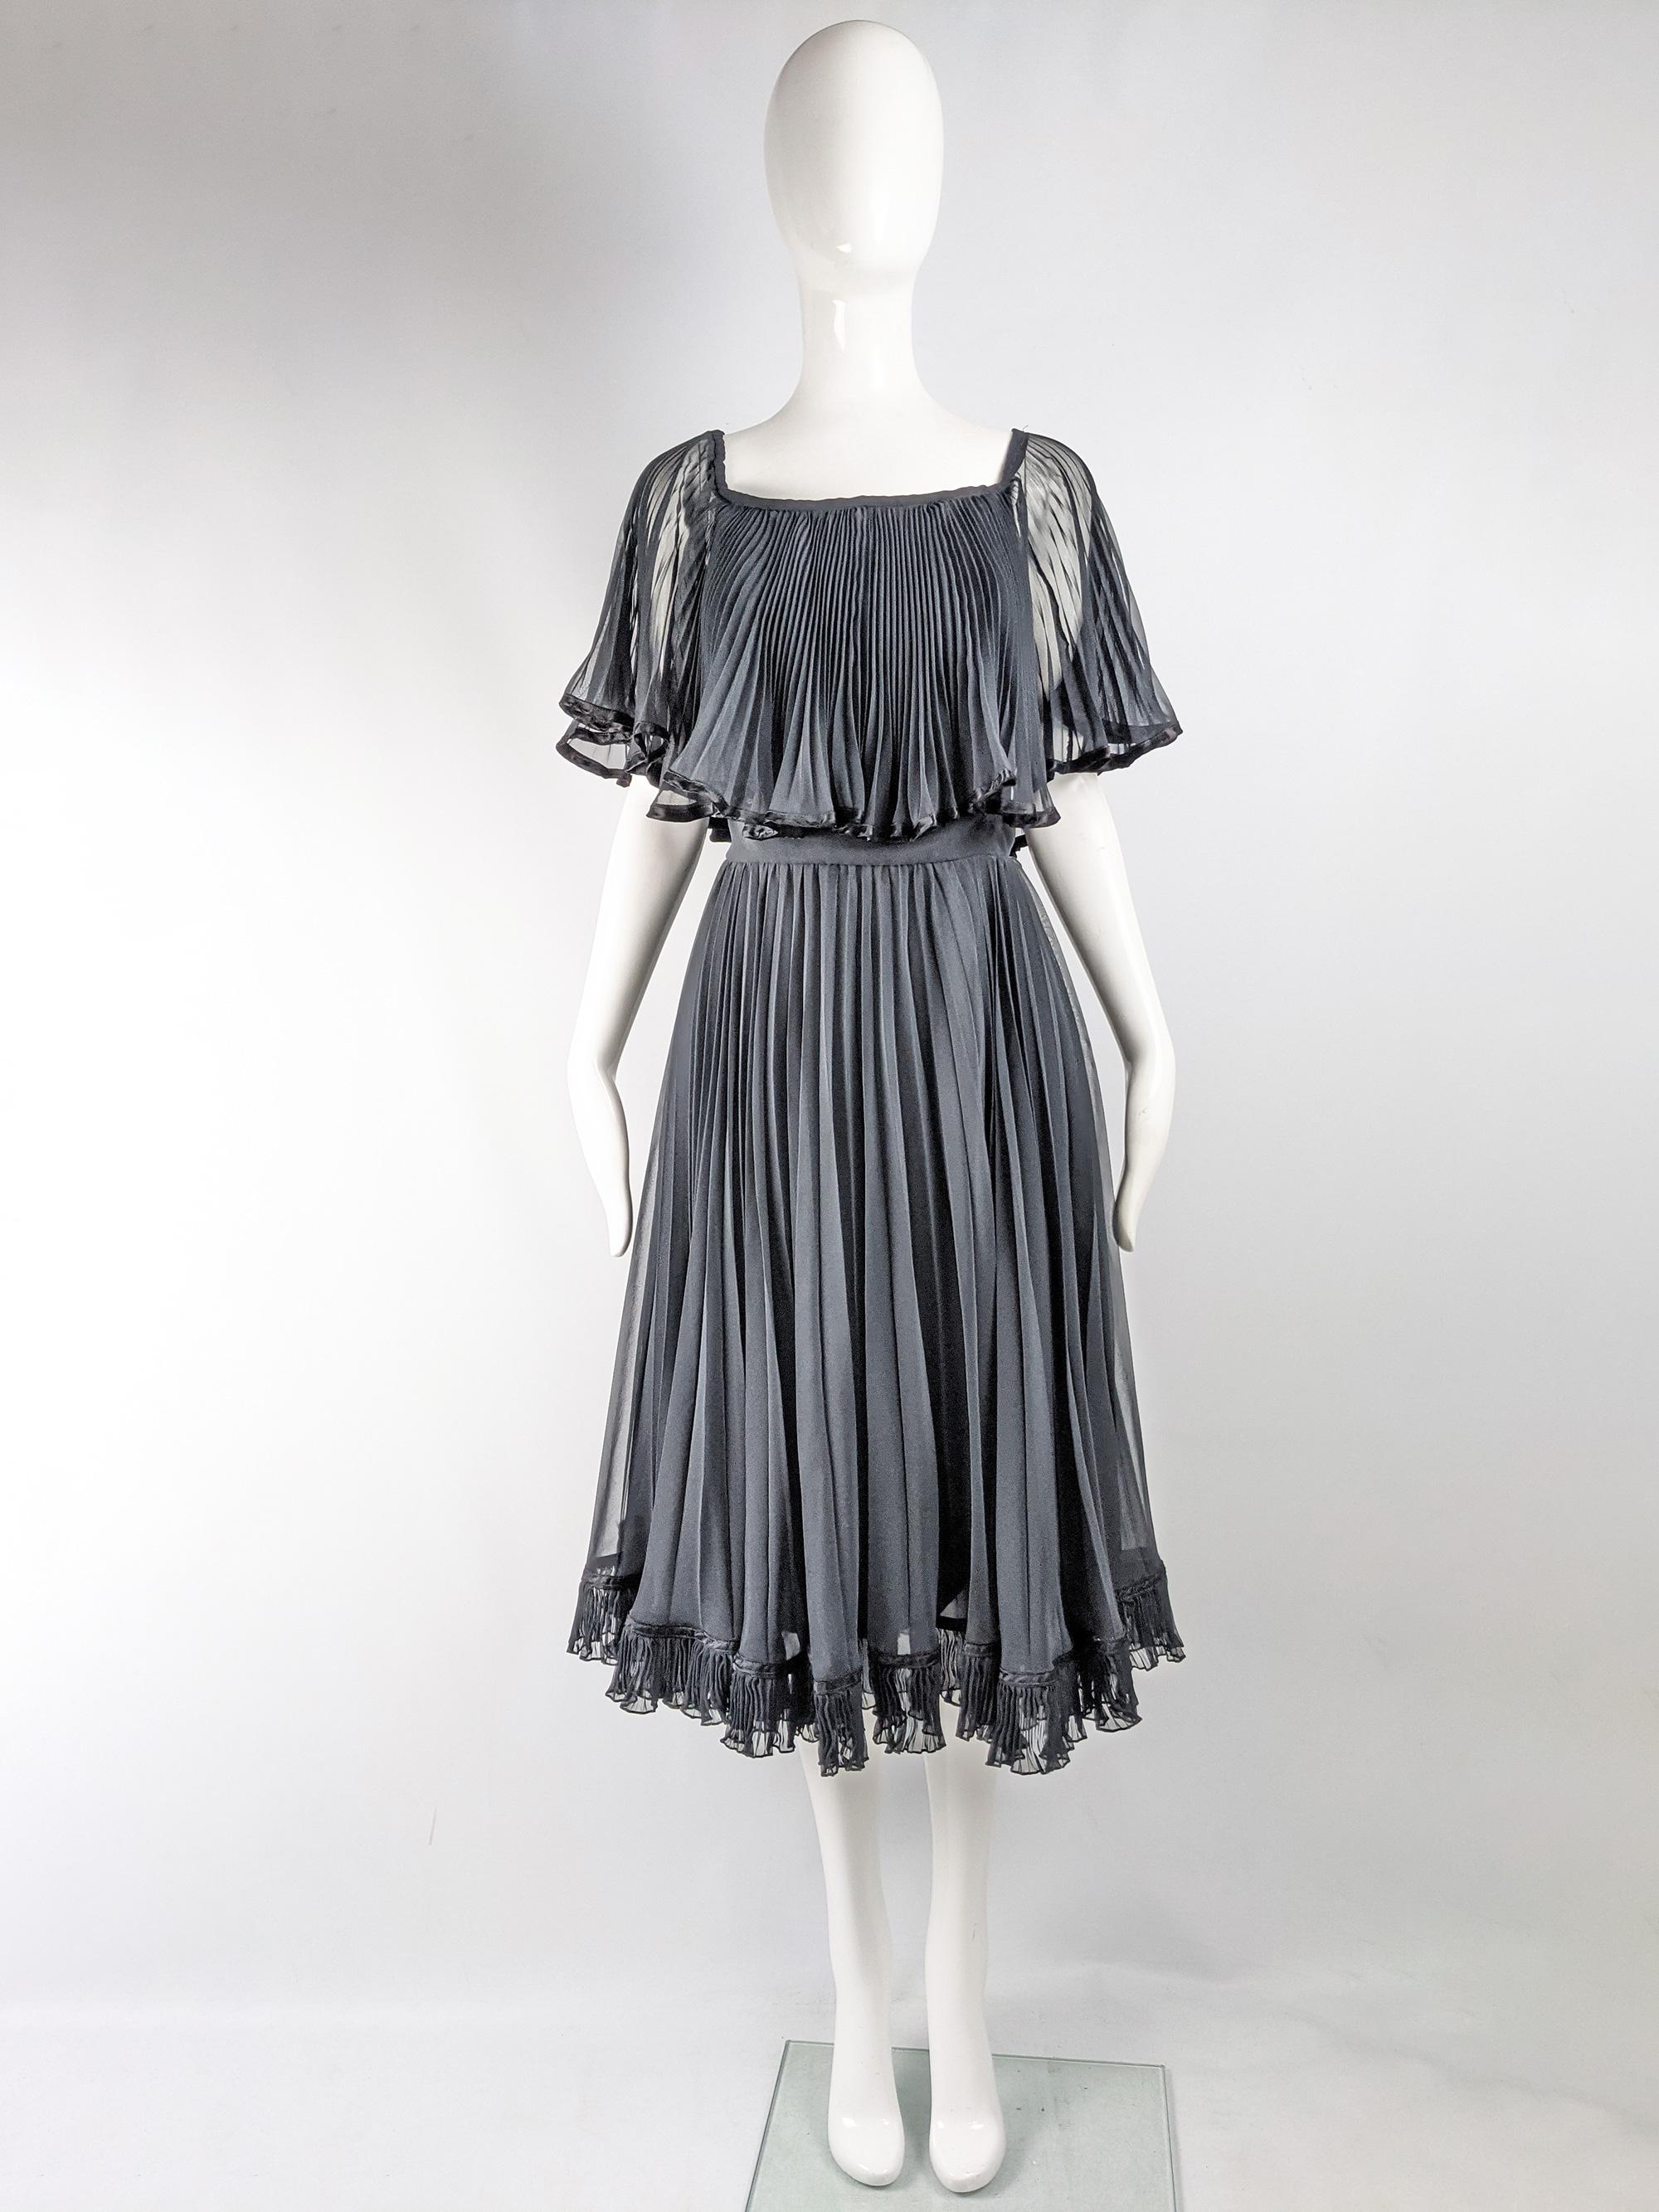 A fabulous vintage womens dress from the 80s by British fashion designer, Christina Stambolian, who often designed for Royals and celebrities, including Princess Diana's iconic 'Revenge Dress'. In a pleated darkest gray / black chiffon with angel